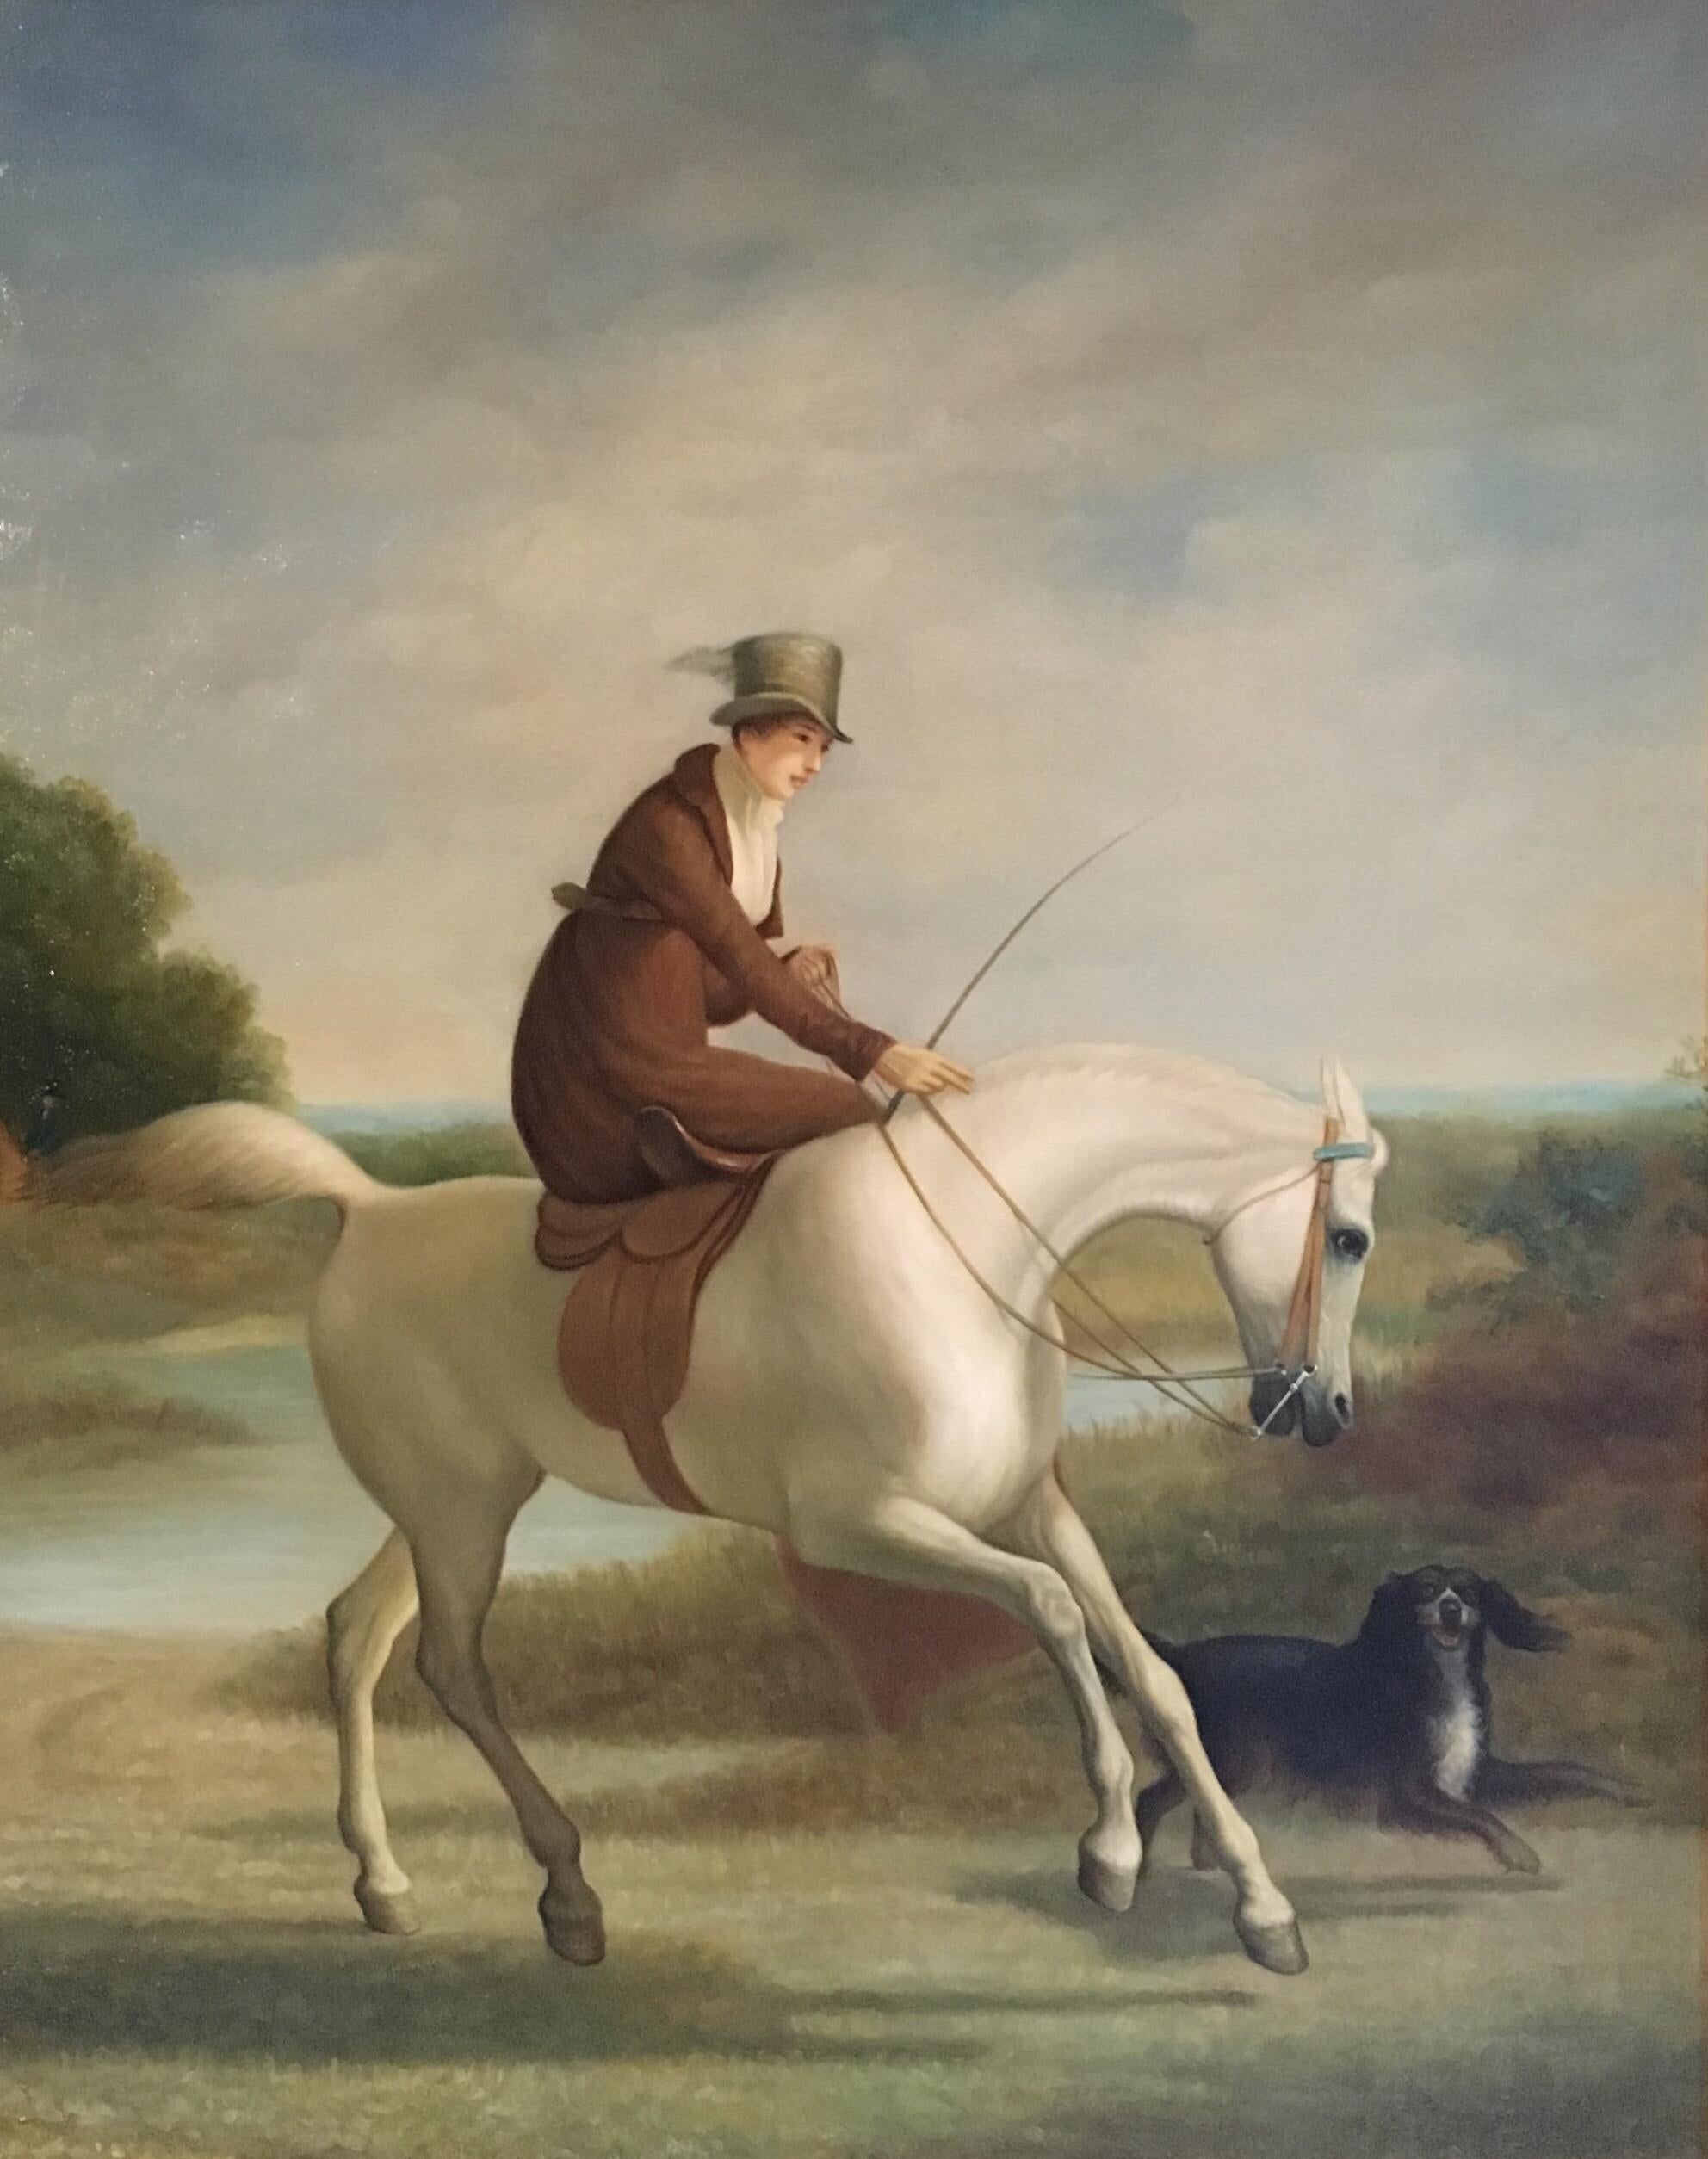 Unknown Portrait Painting - The Rider, Fine Portrait Lady Side Saddle, Oil Painting, Equestrian Themed